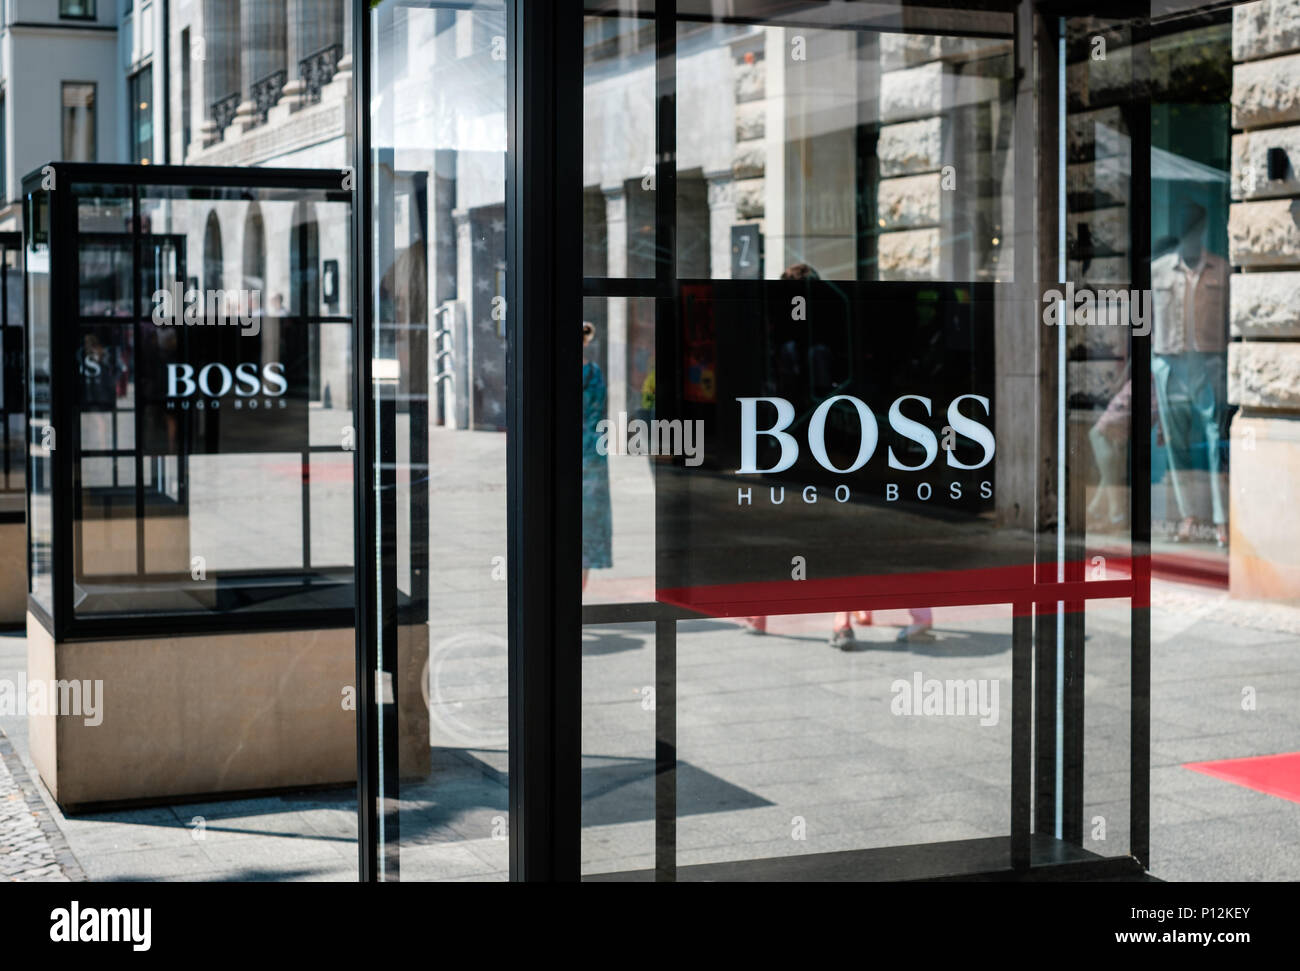 Hugo Boss Shop Window High Resolution Stock Photography and Images - Alamy